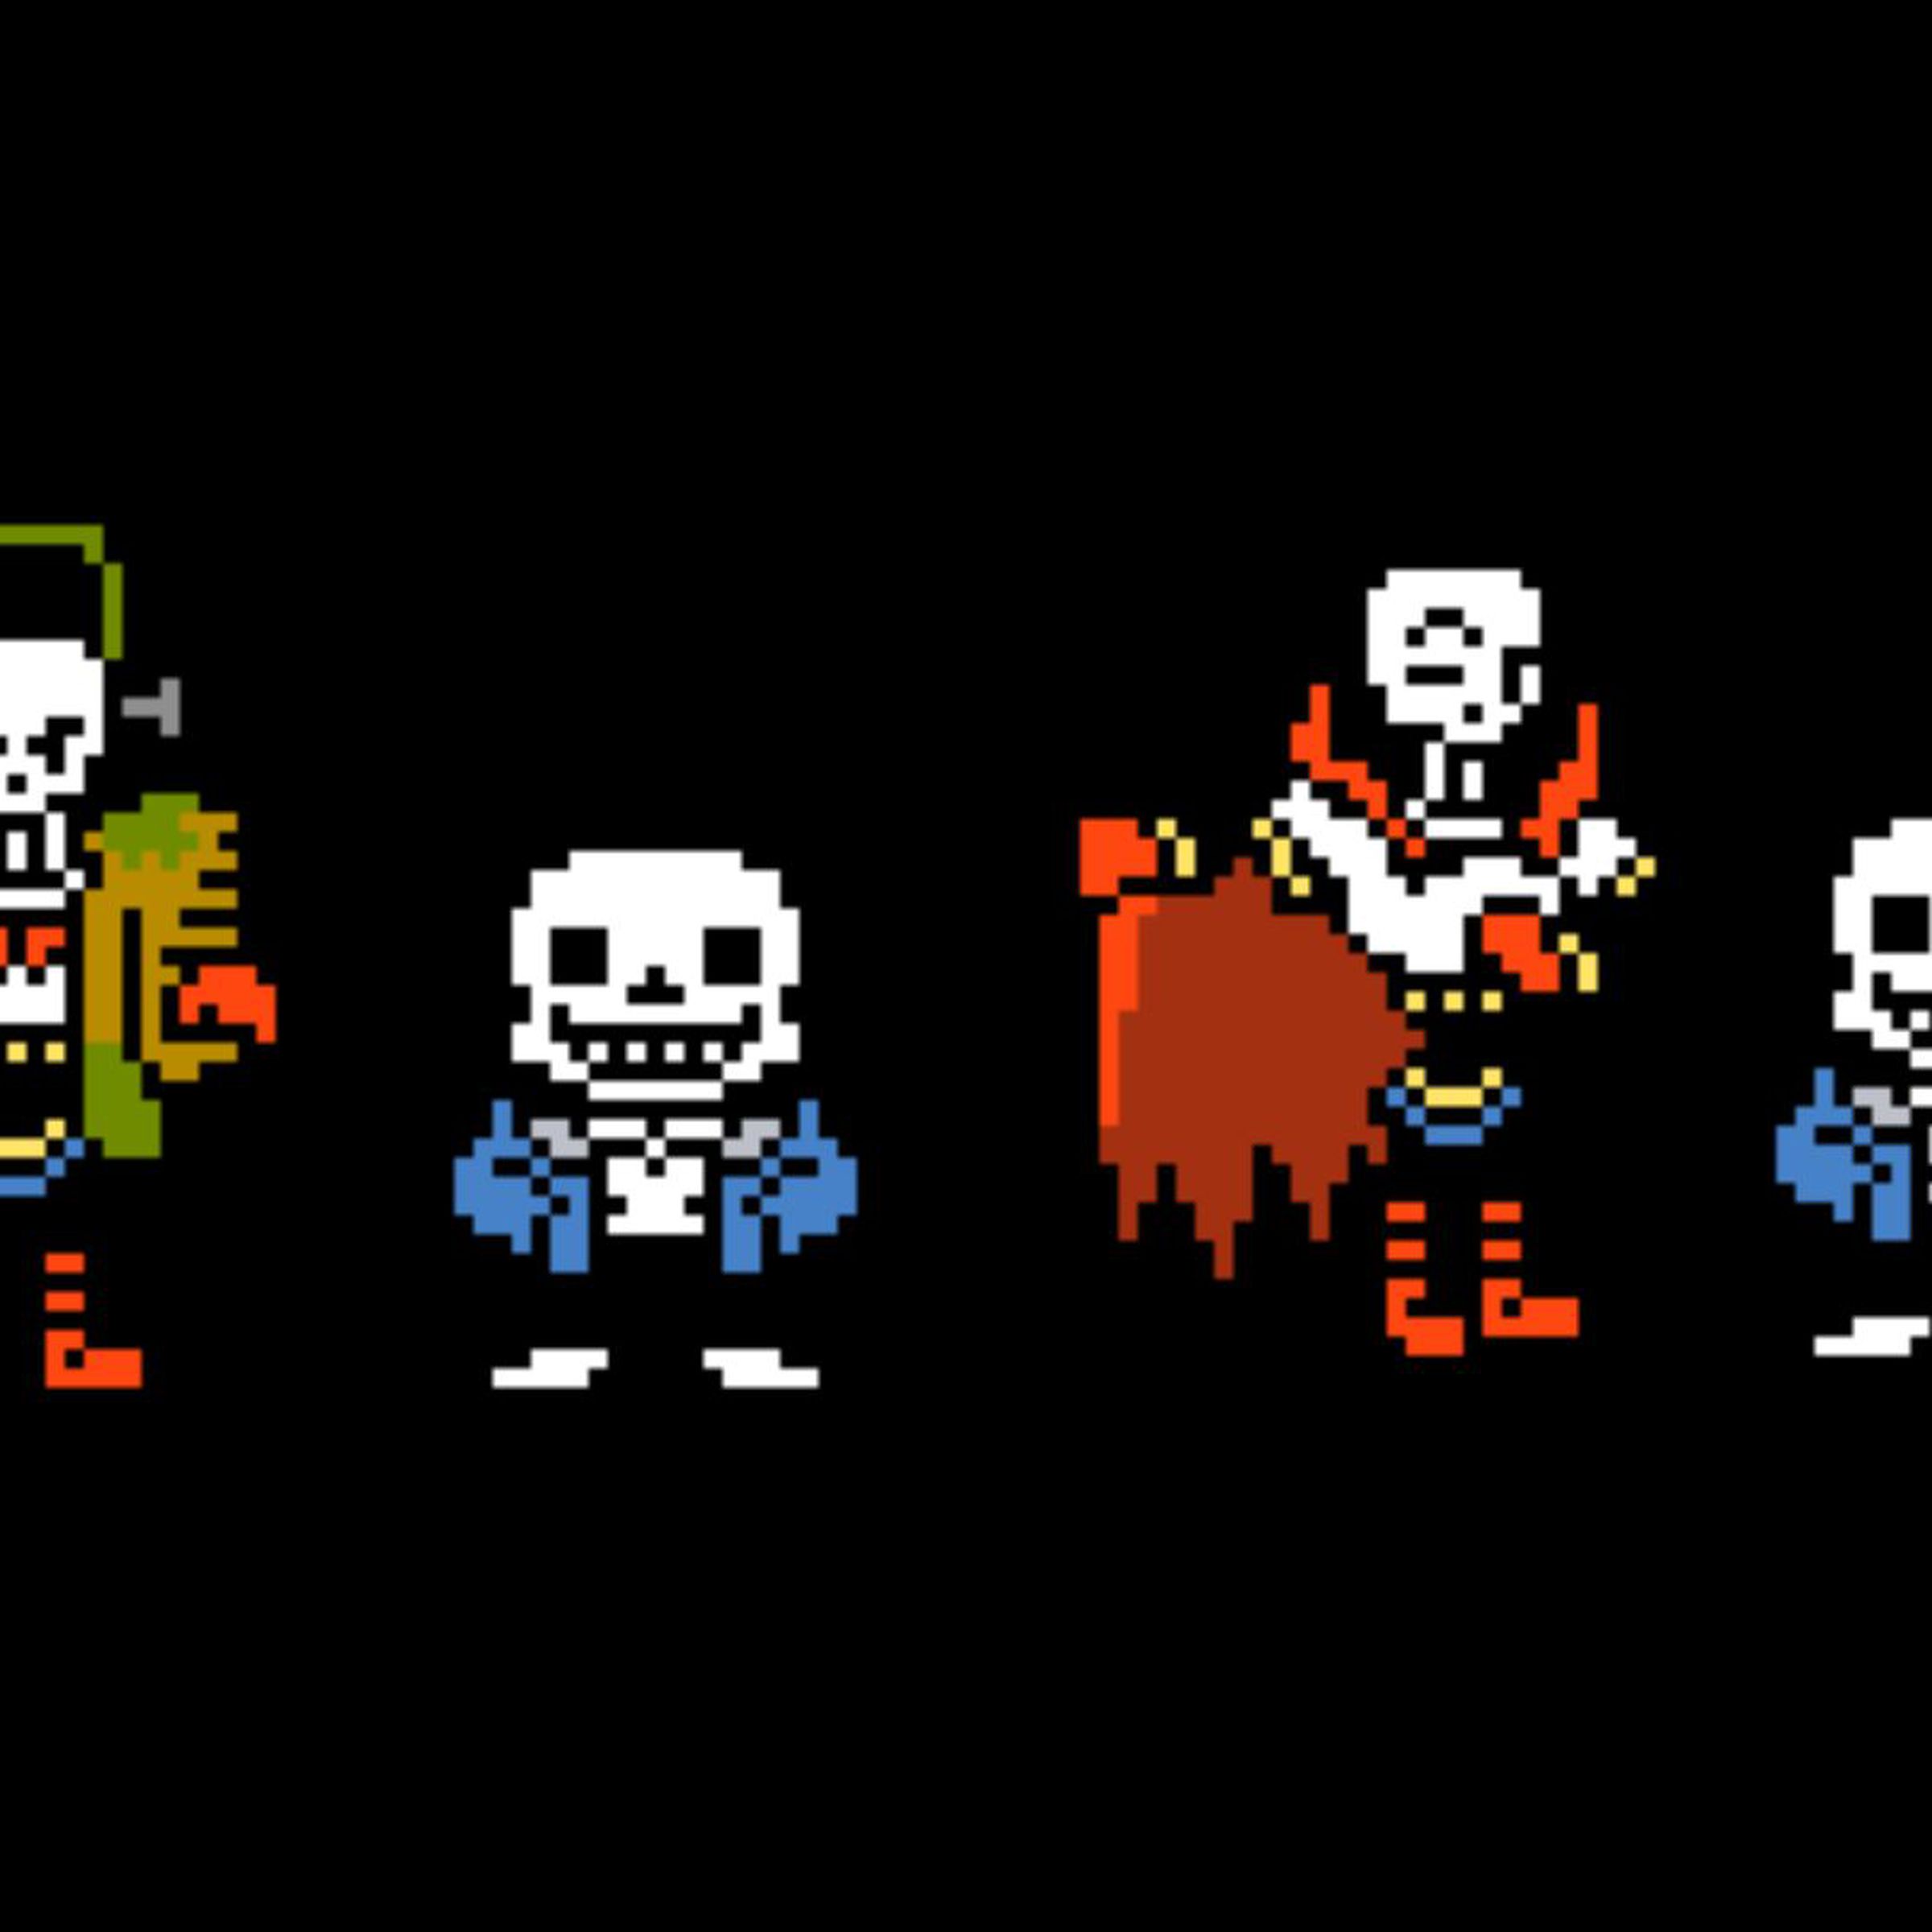 Image of Undertale characters Papyrus and Sans with Papyrus dressed in a costume of Frankenstein’s monster and Dracula.